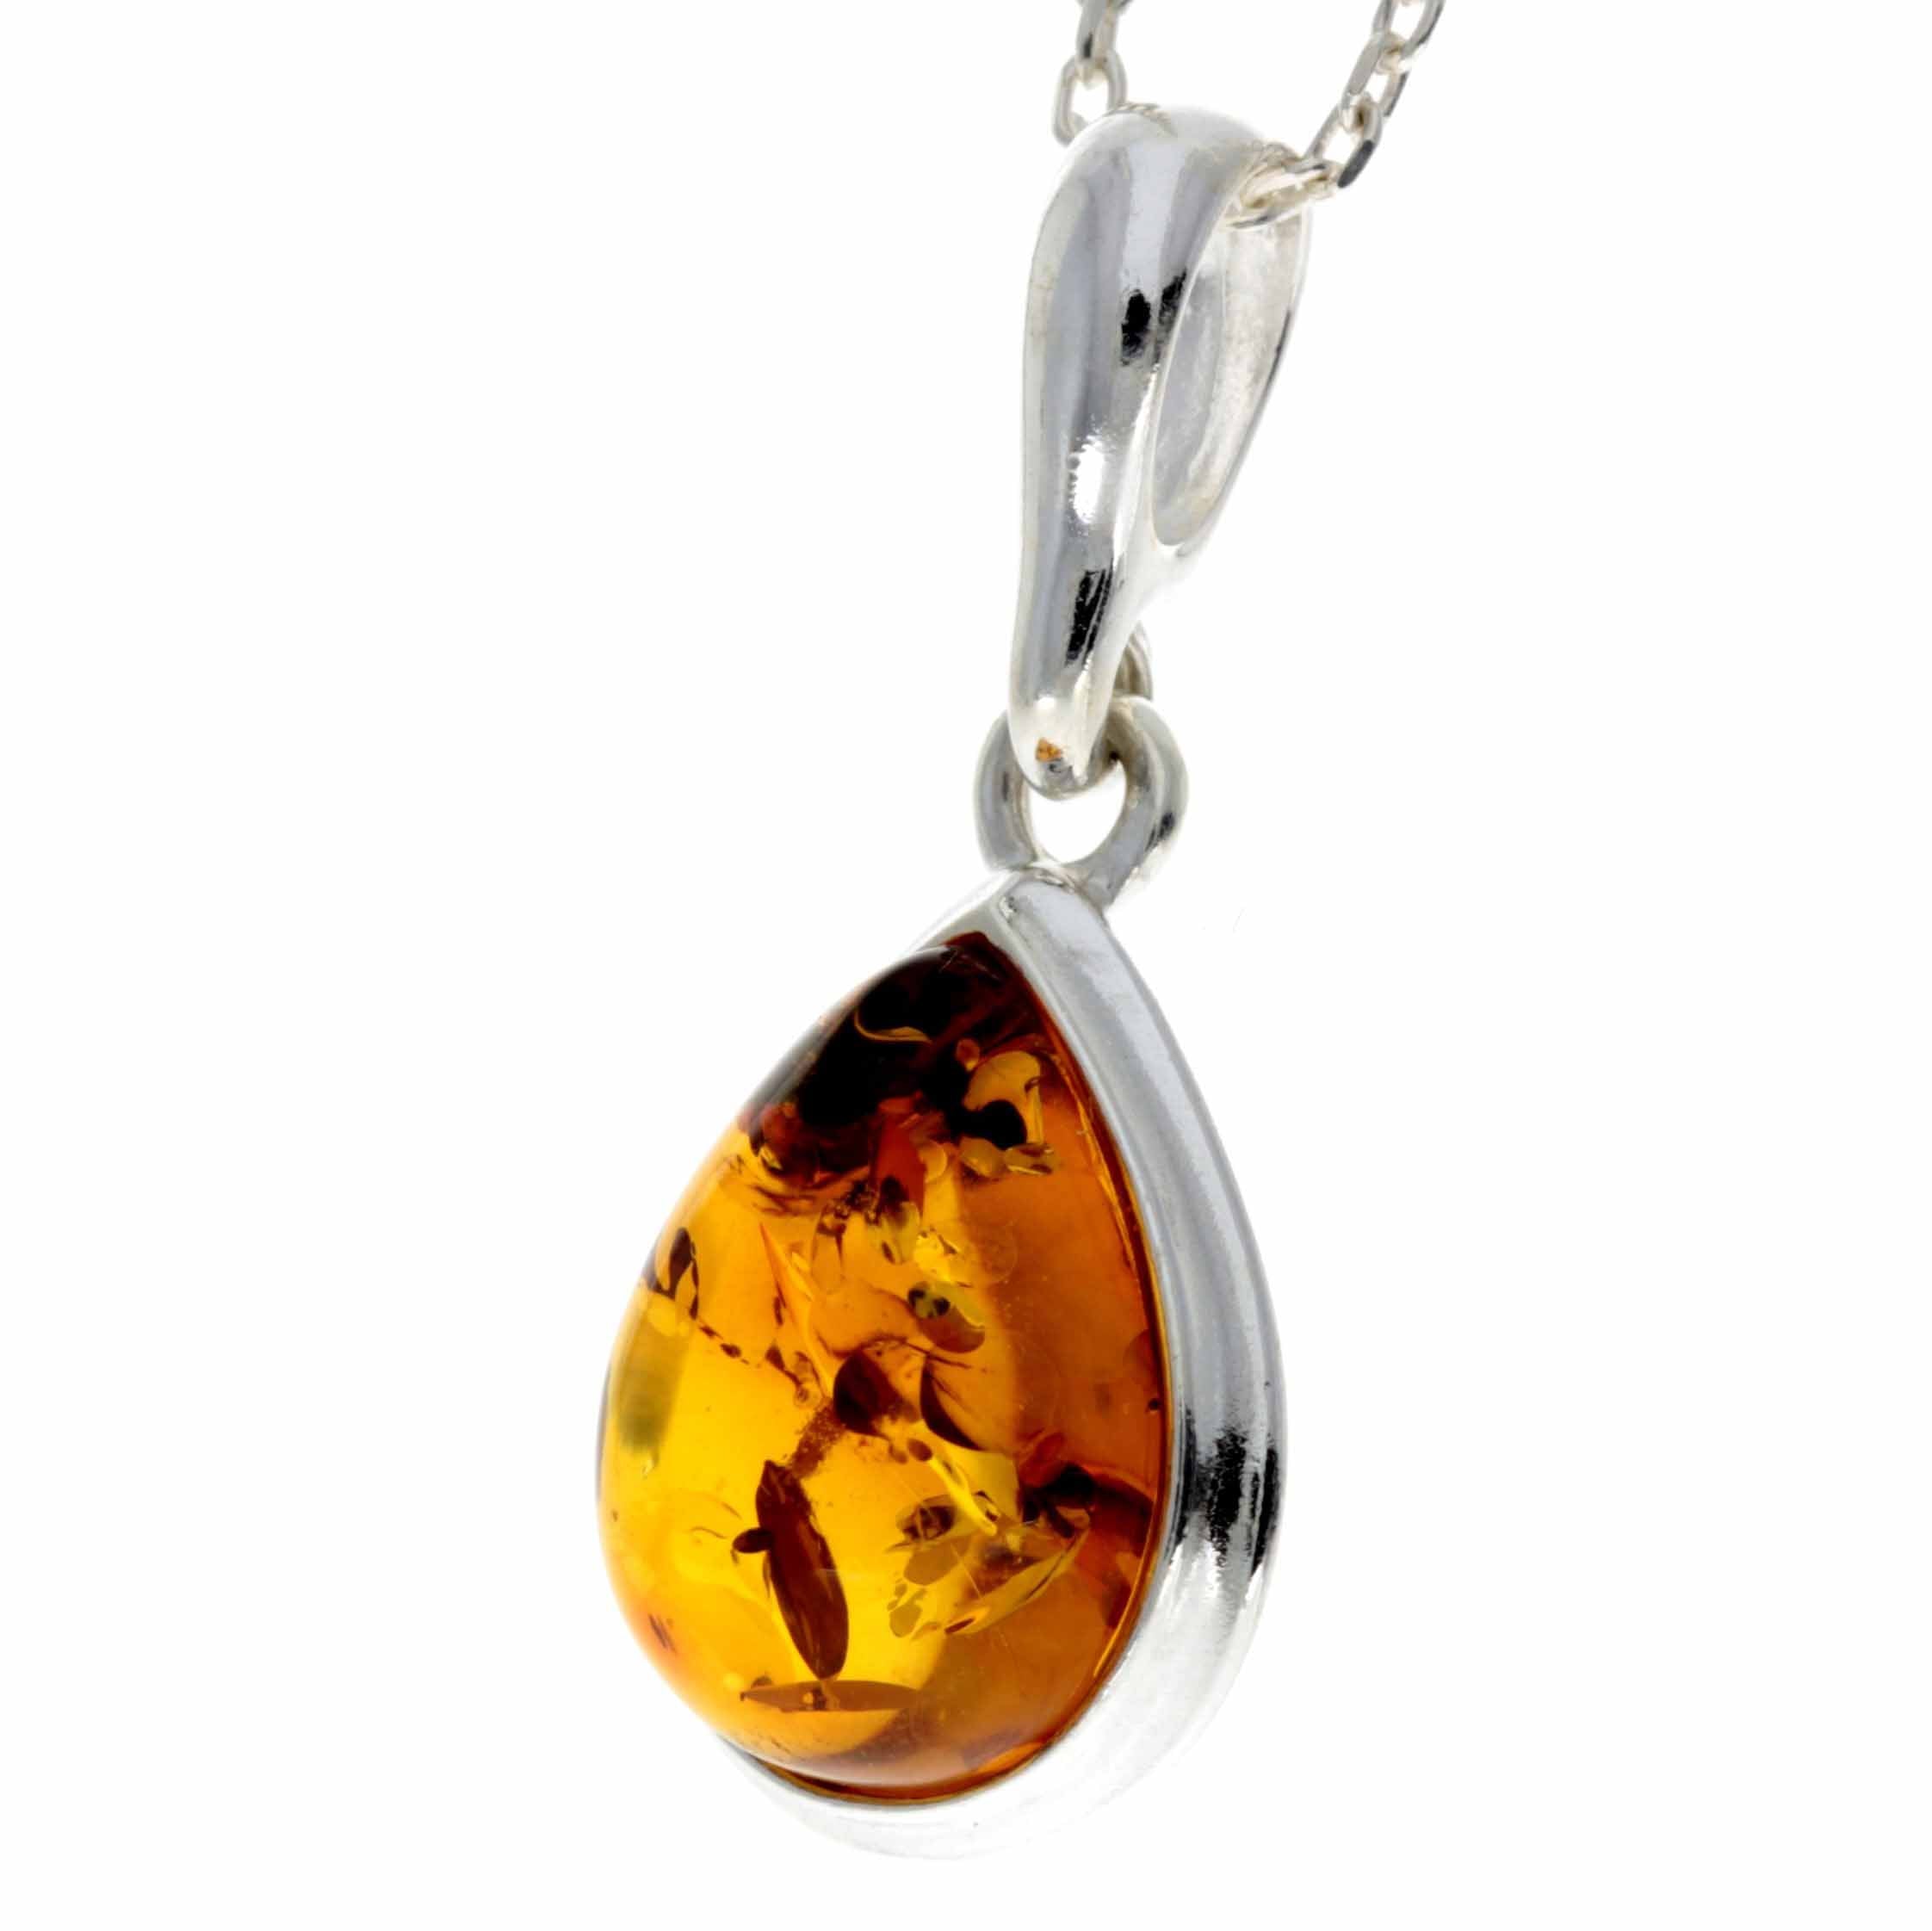 925 Sterling Silver & Baltic Amber Teardrop Classic Pendant - 435